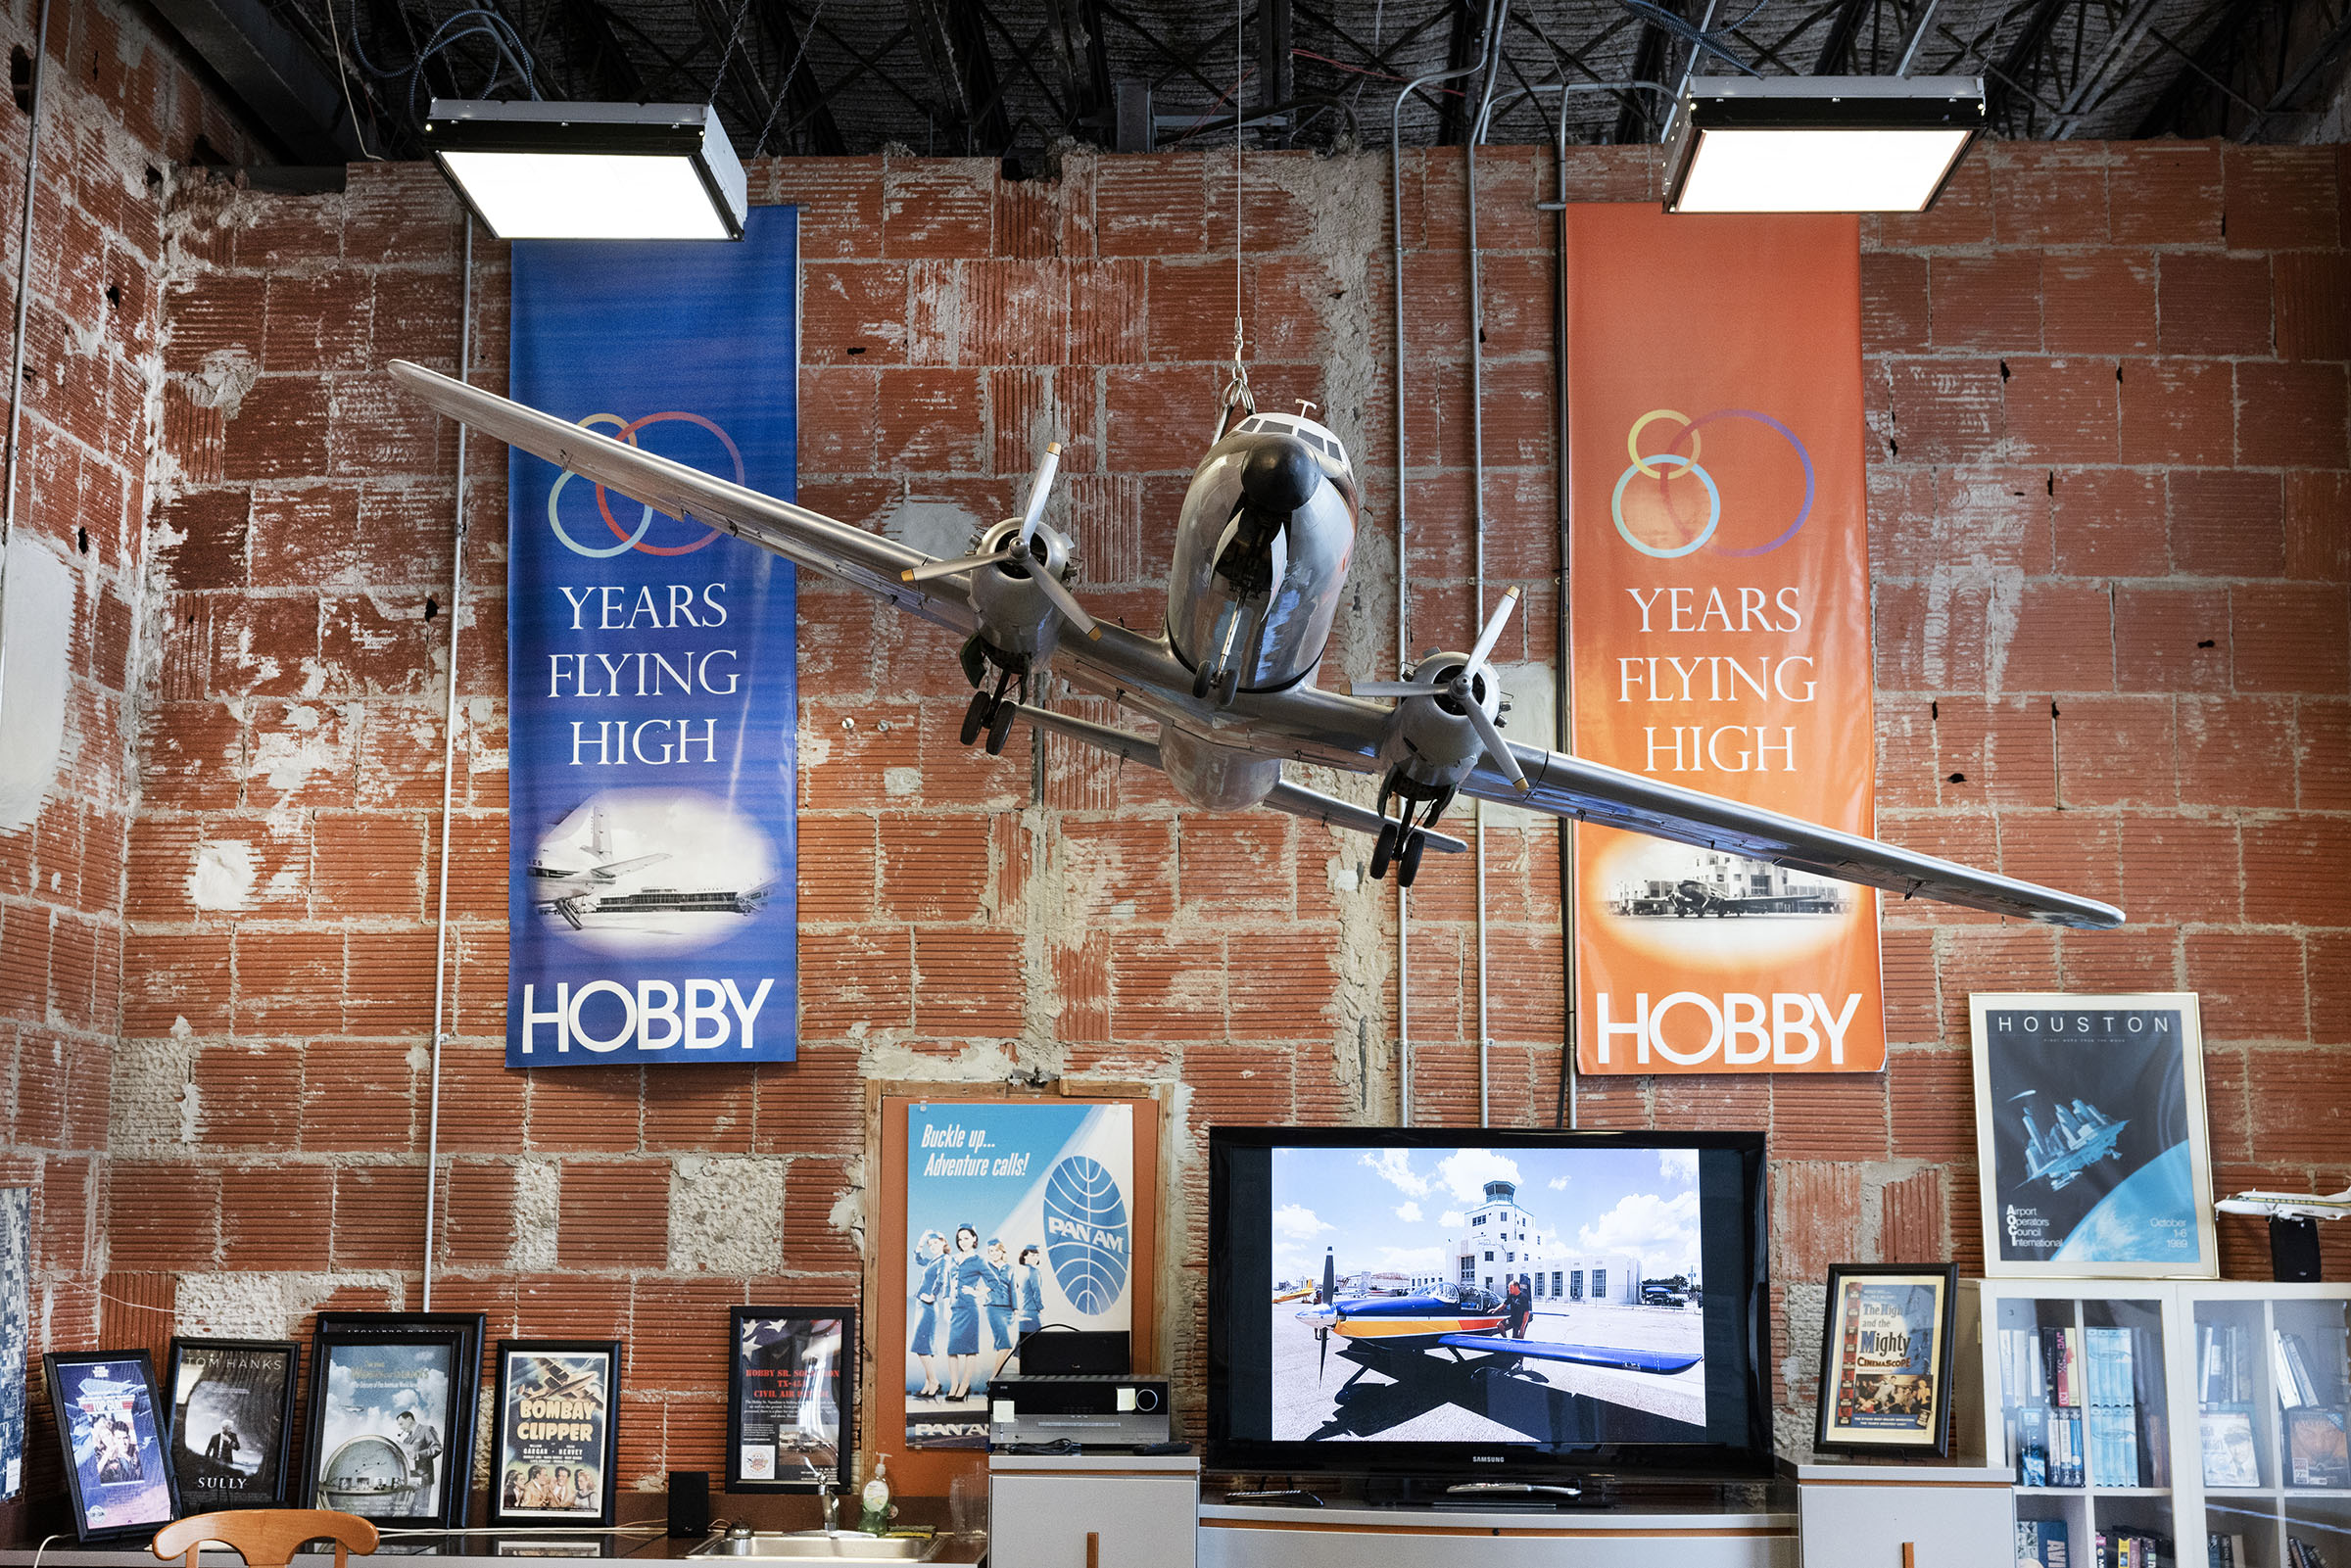 A glass display case contains photos, Pan Am posters, and banners printed with "50 Years Flying High" for Hobby Airport, and a model passenger jet hangs at a tilt. 